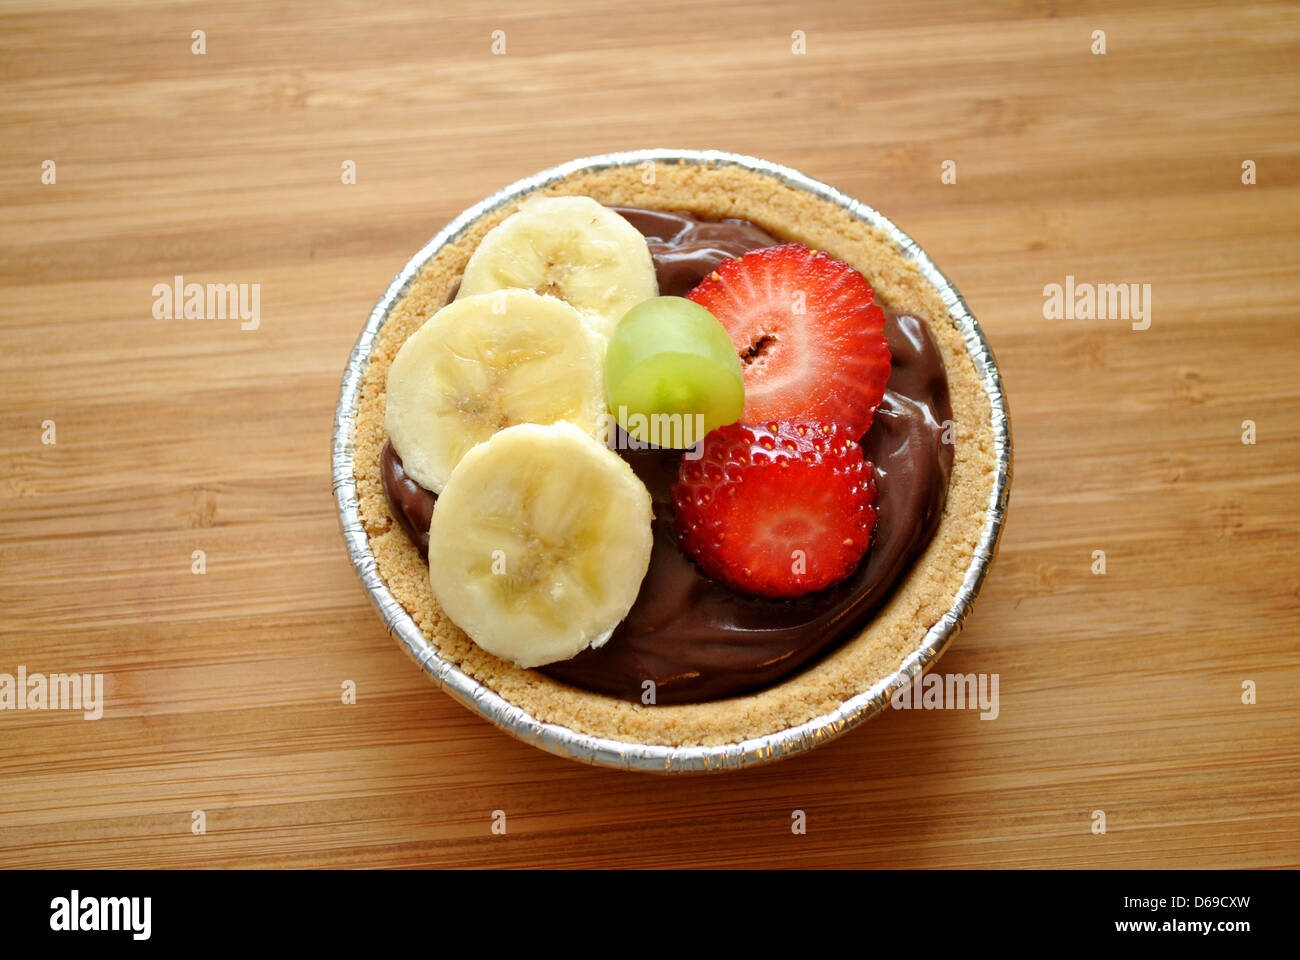 Top View of a fruity Chocolate Pudding Pie Stock Photo